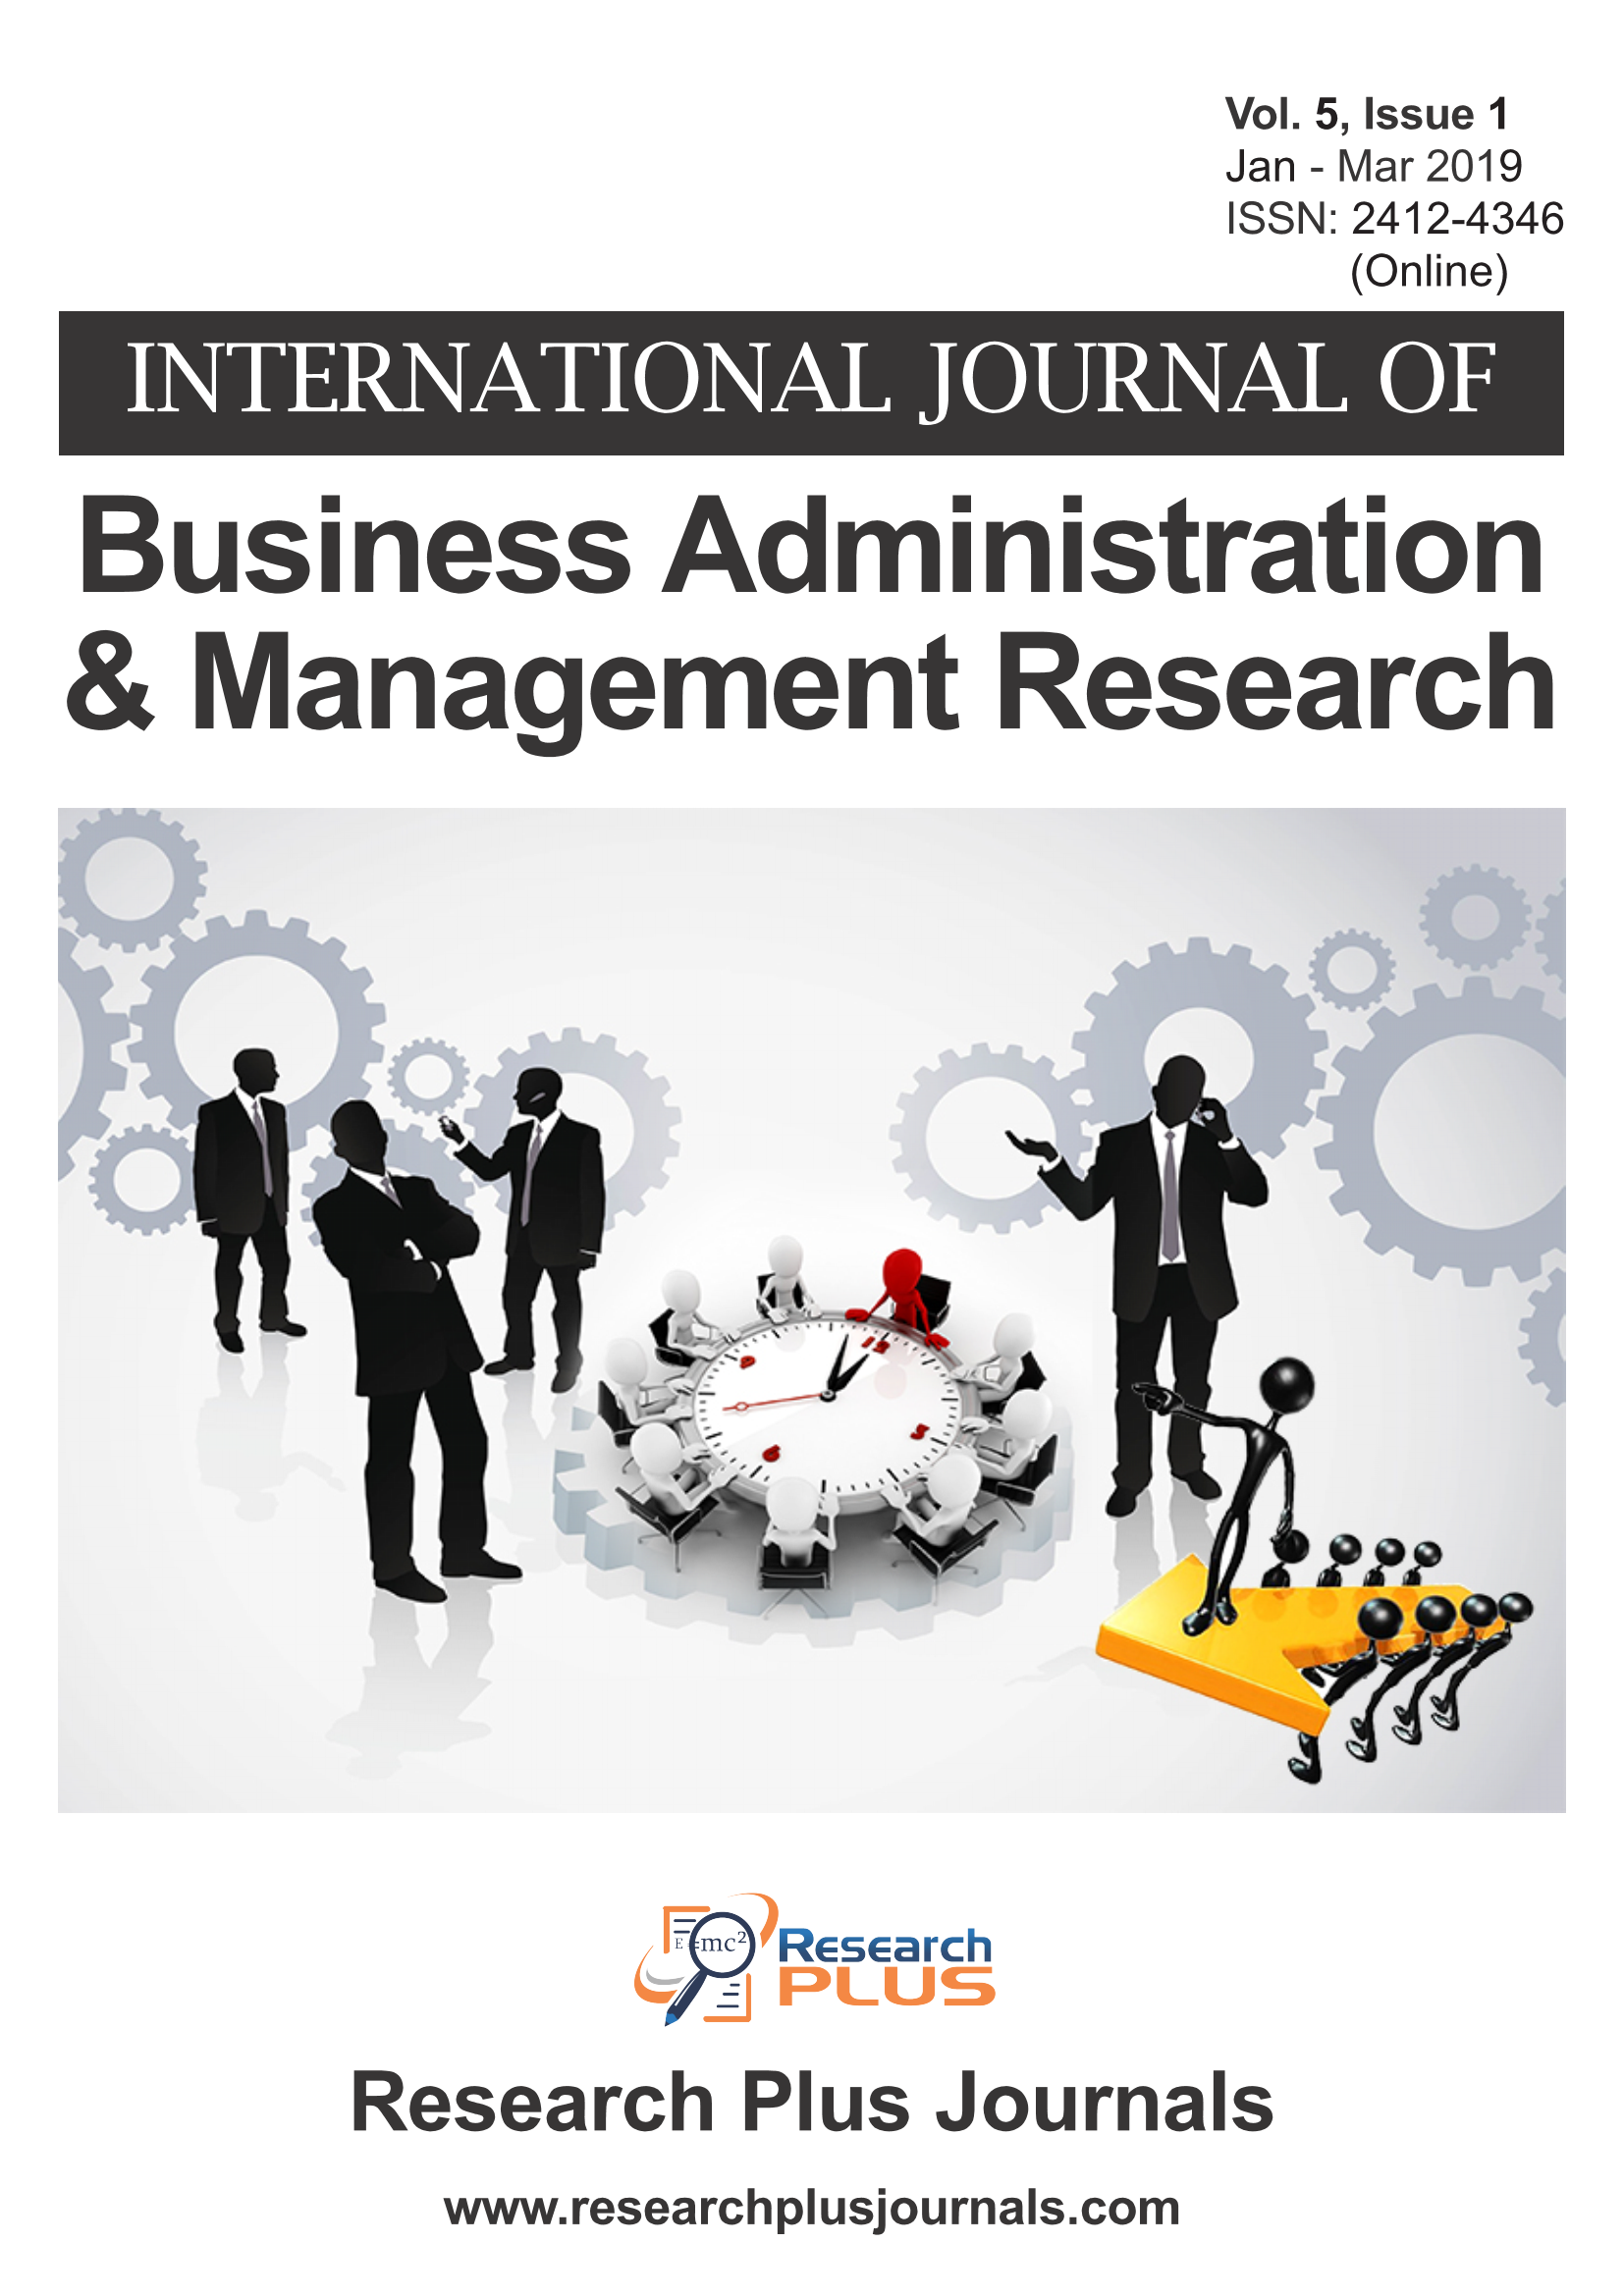 Volume 5, Issue 1, International Journal of Business Administration and Management Research (IJBAMR) (Online ISSN: 2412-4346)